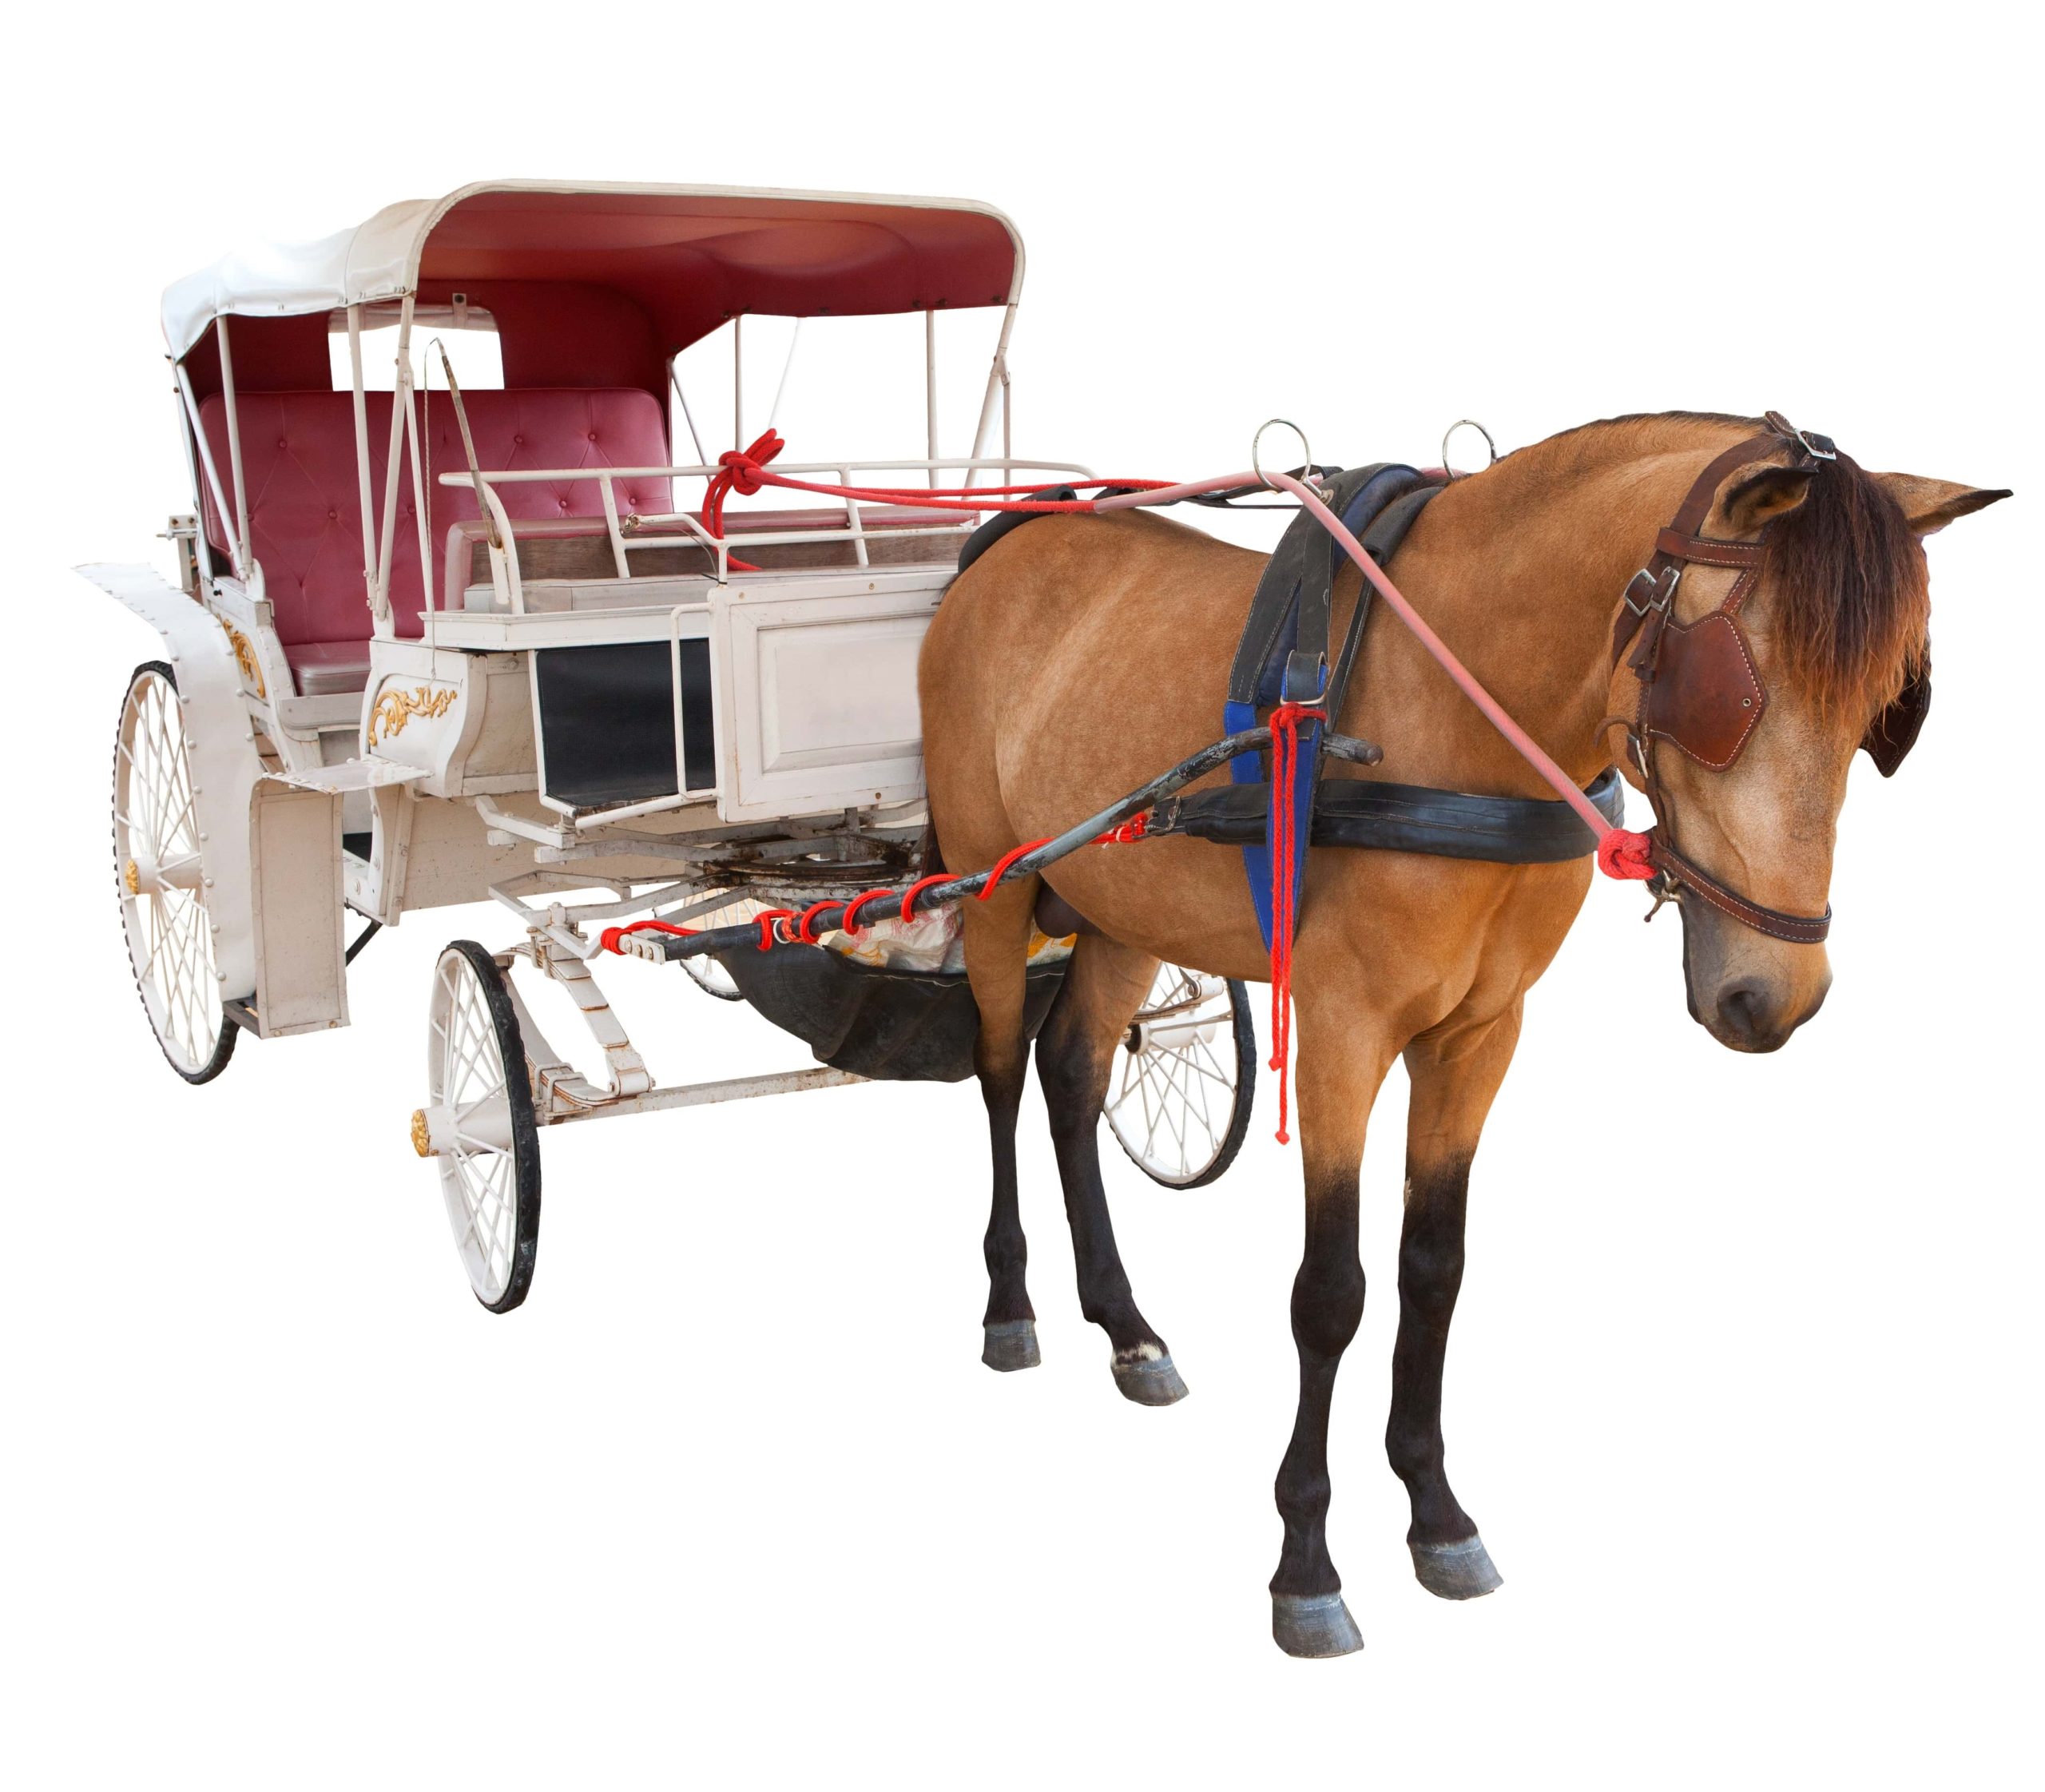 Carriage Ride Insurance – Carriage Liability Insurance - Horse Drawn Vehicles